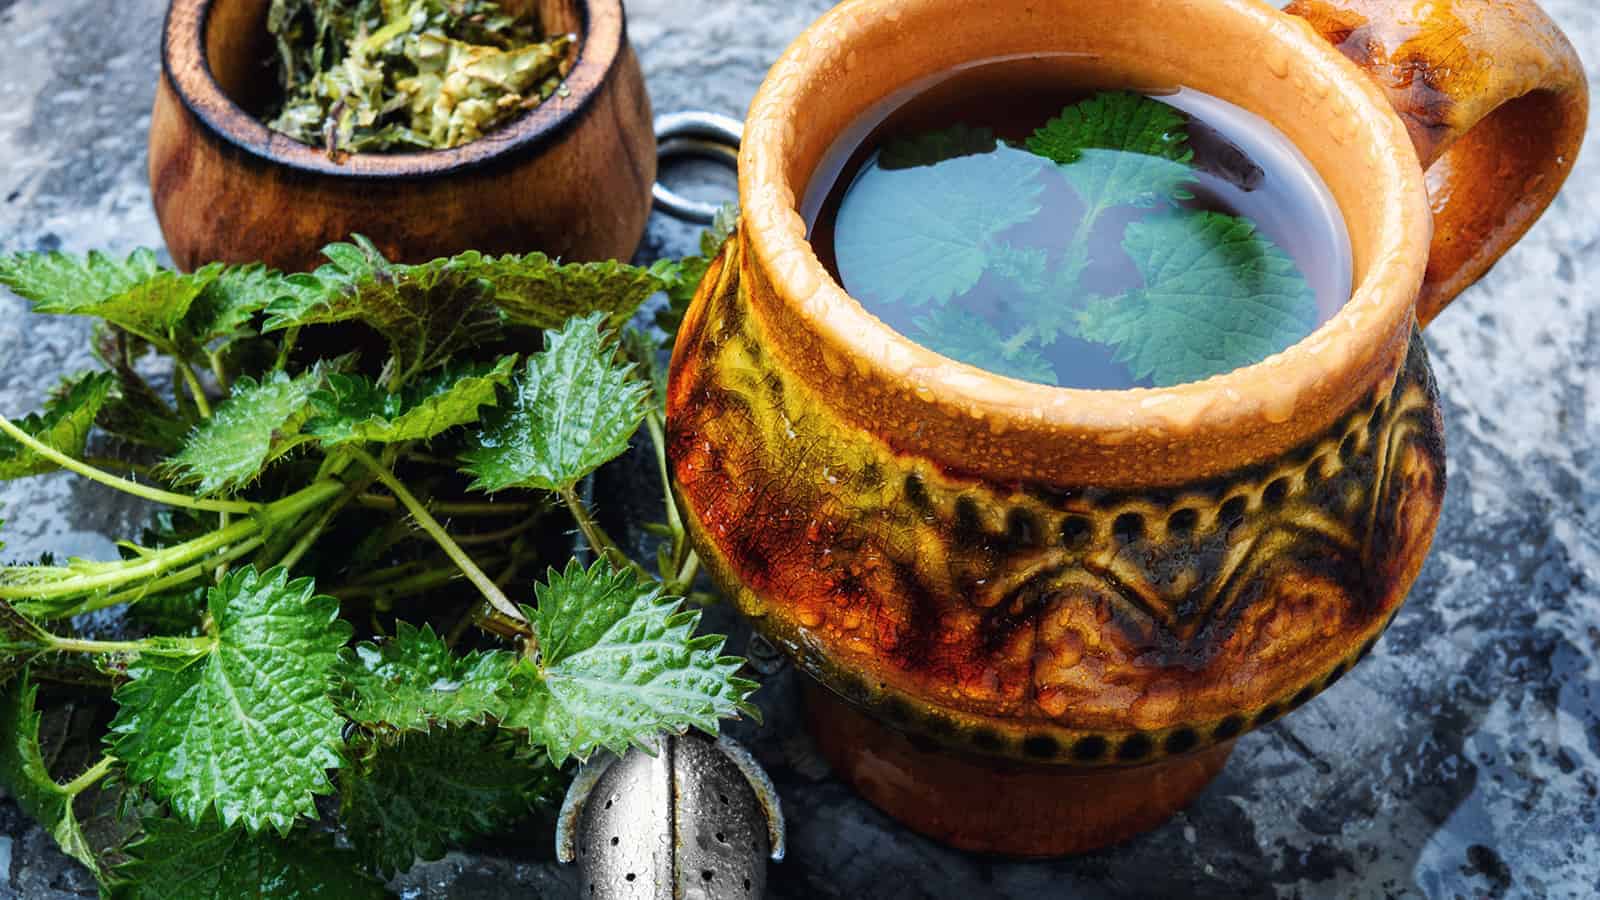 10 Reasons to Brew a Cup of Stinging Nettle Tea Every Day